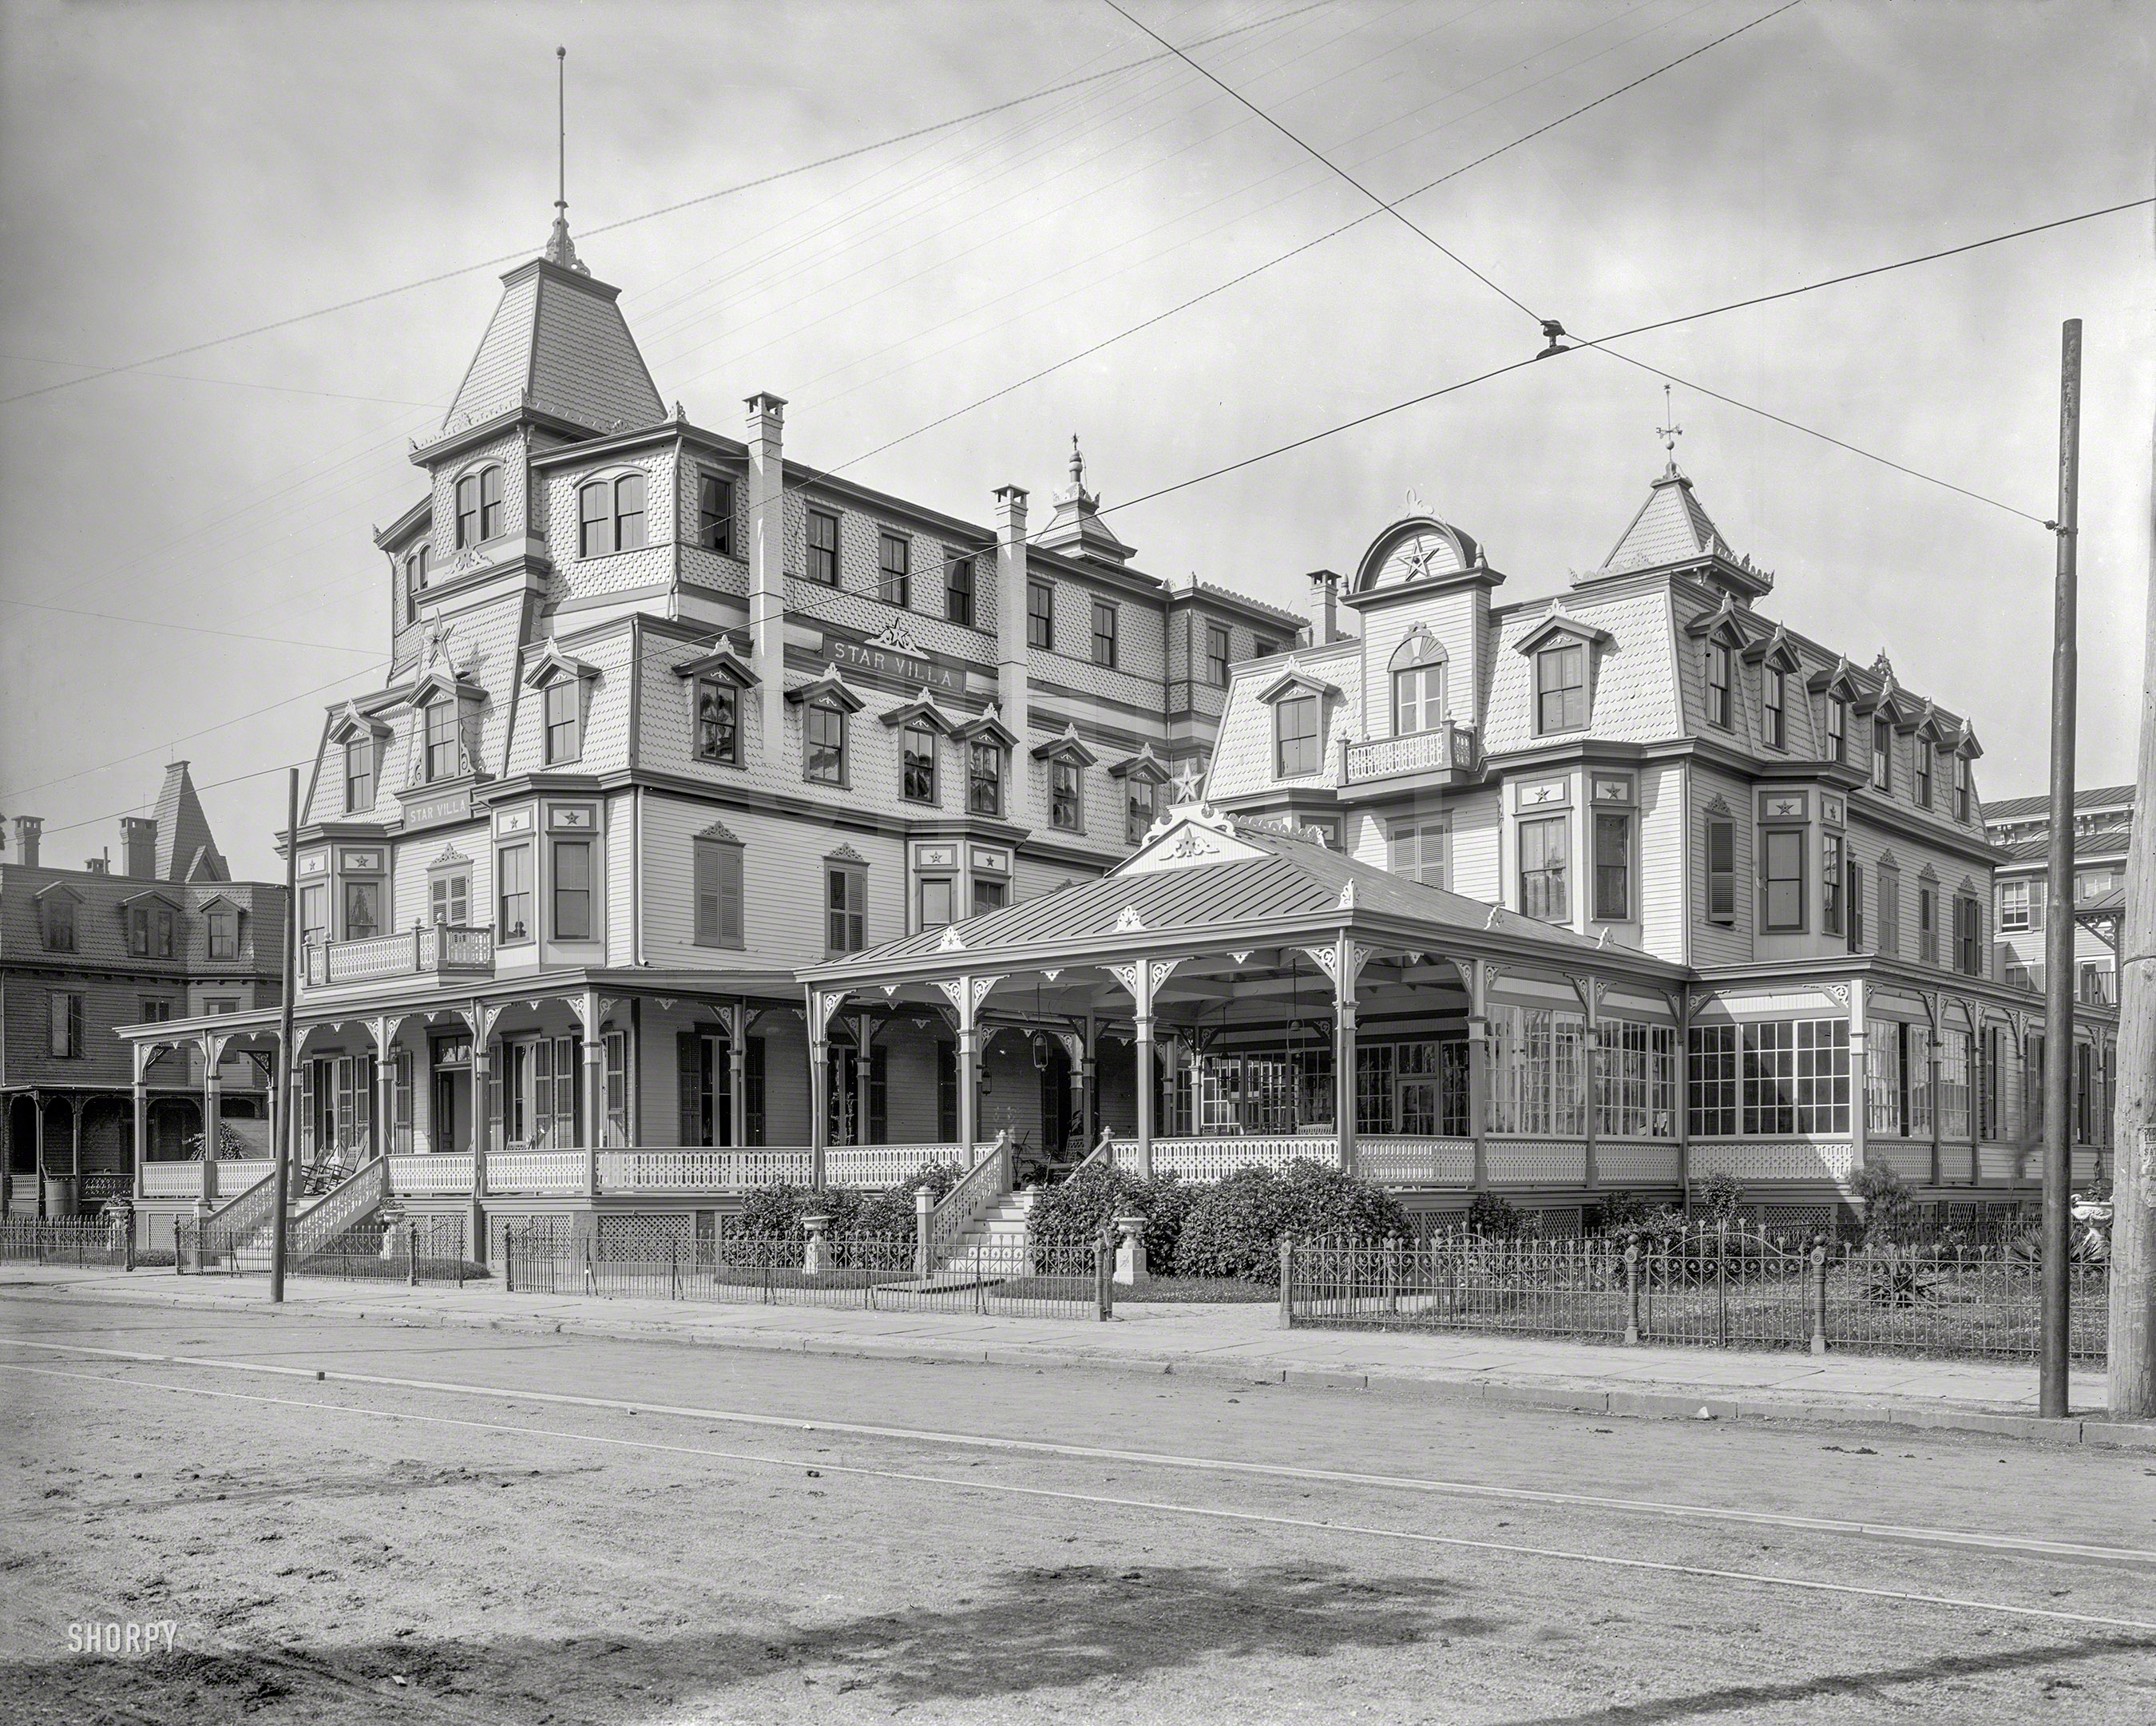 Circa 1900. "Star Villa, Cape May, N.J." Completed 1885; fourth floor added 1893; moved to current location in 1967. 8x10 glass negative. View full size.